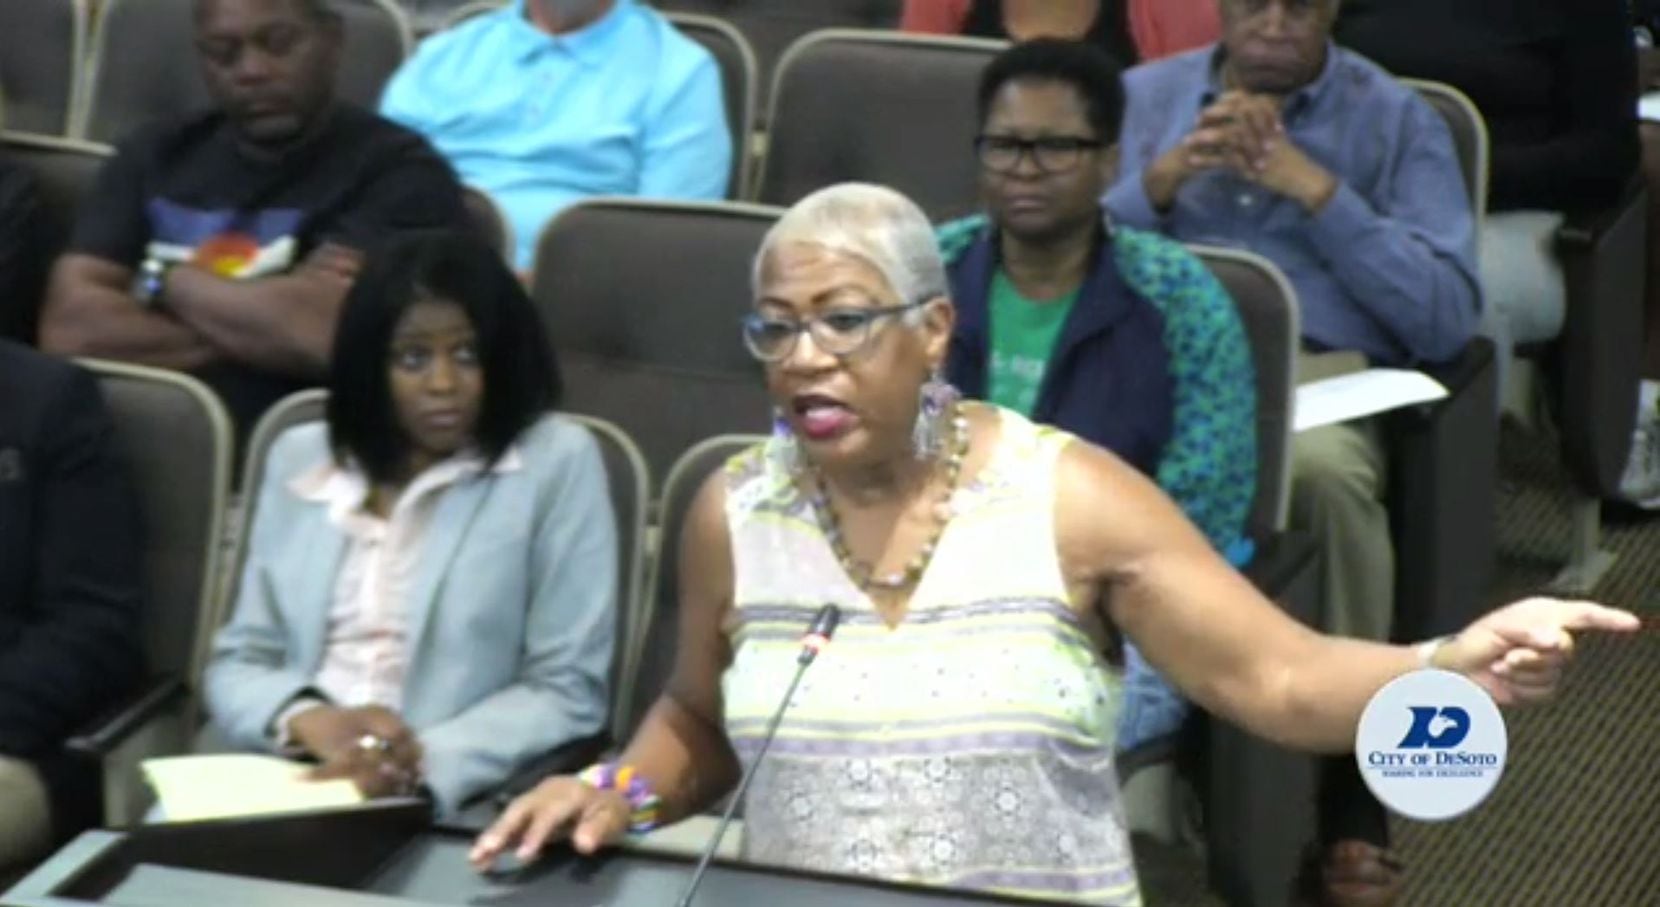 Precious Rita Davis asked the council to bring in an outside law enforcement to investigate...